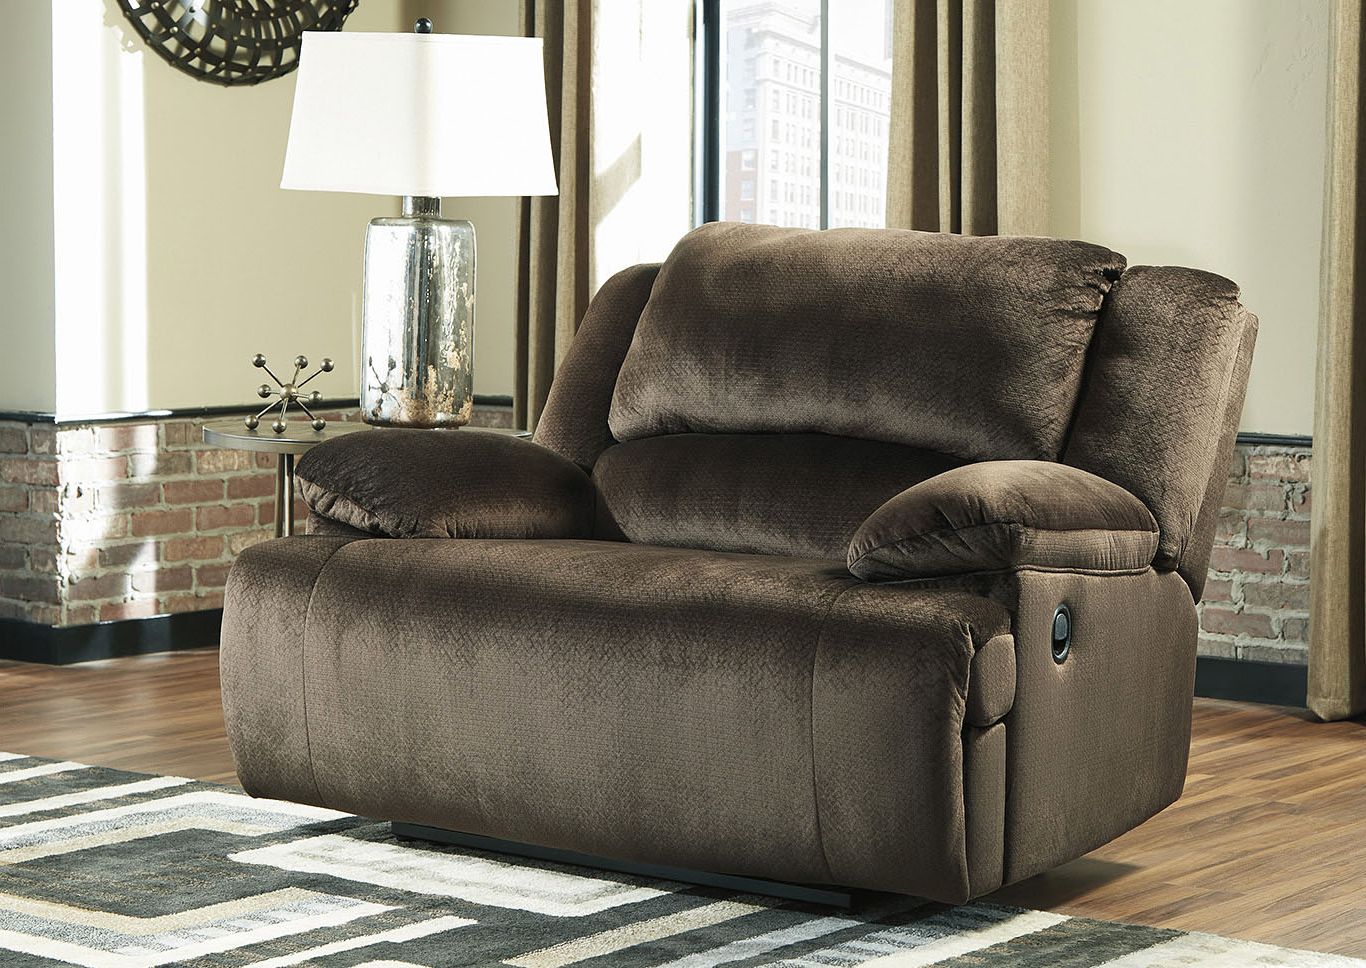 Round Beige Faux Leather Ottomans With Pull Tab Regarding Well Known Clonmel Oversized Recliner Roberts Furniture & Mattress (View 9 of 10)